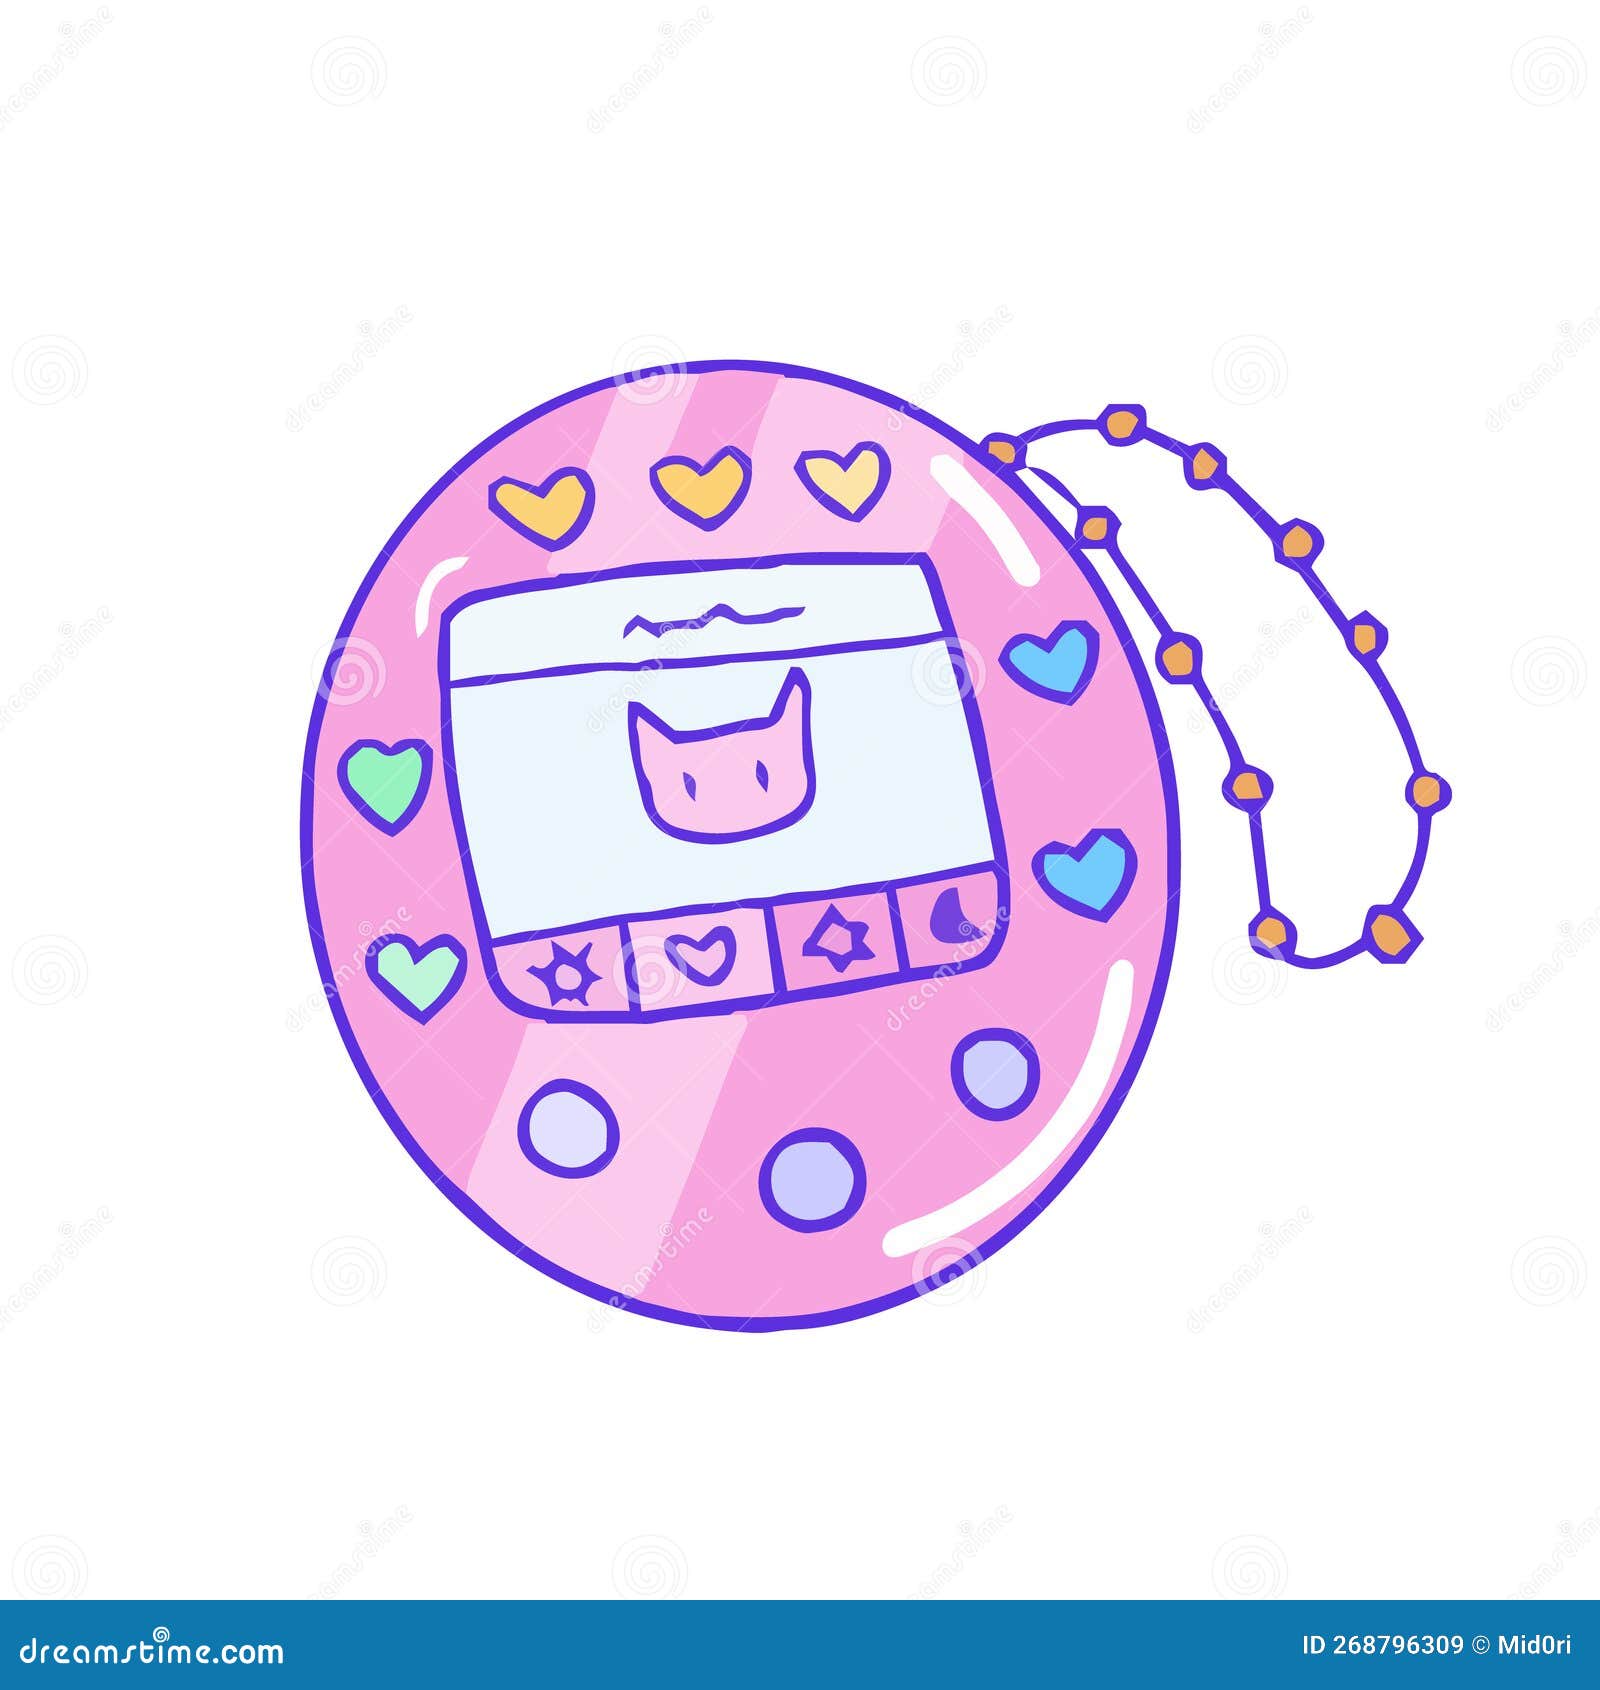 https://thumbs.dreamstime.com/z/hand-drawn-cute-s-aesthetic-girl-pocket-game-device-isolated-japanese-kawaii-pet-mini-gadget-colorful-buttons-vector-268796309.jpg